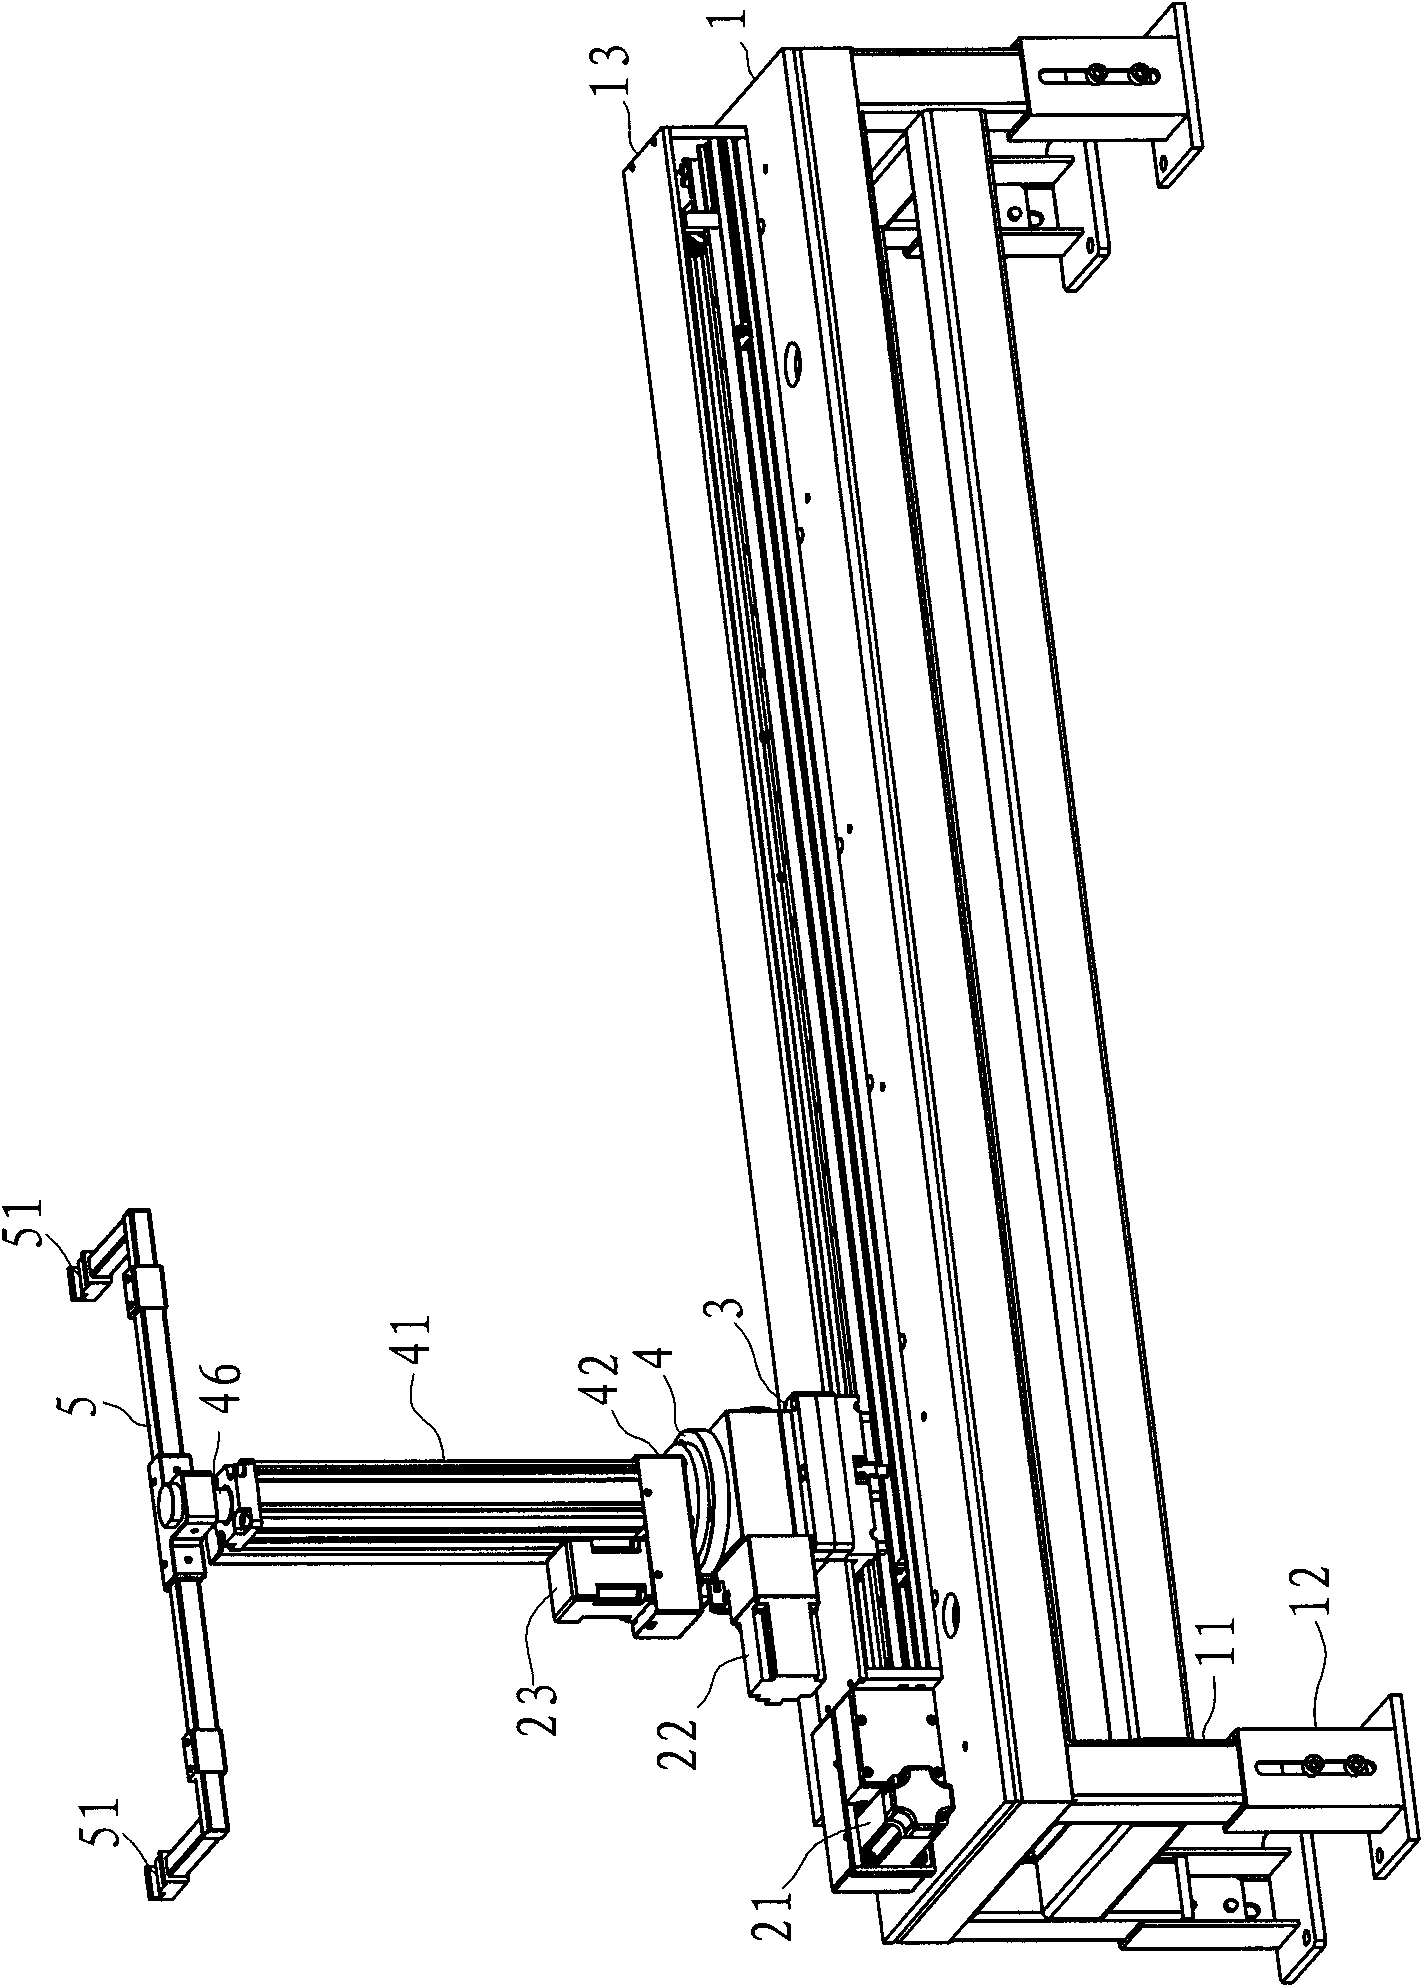 Transfer machine and flocking removing and drying system with same